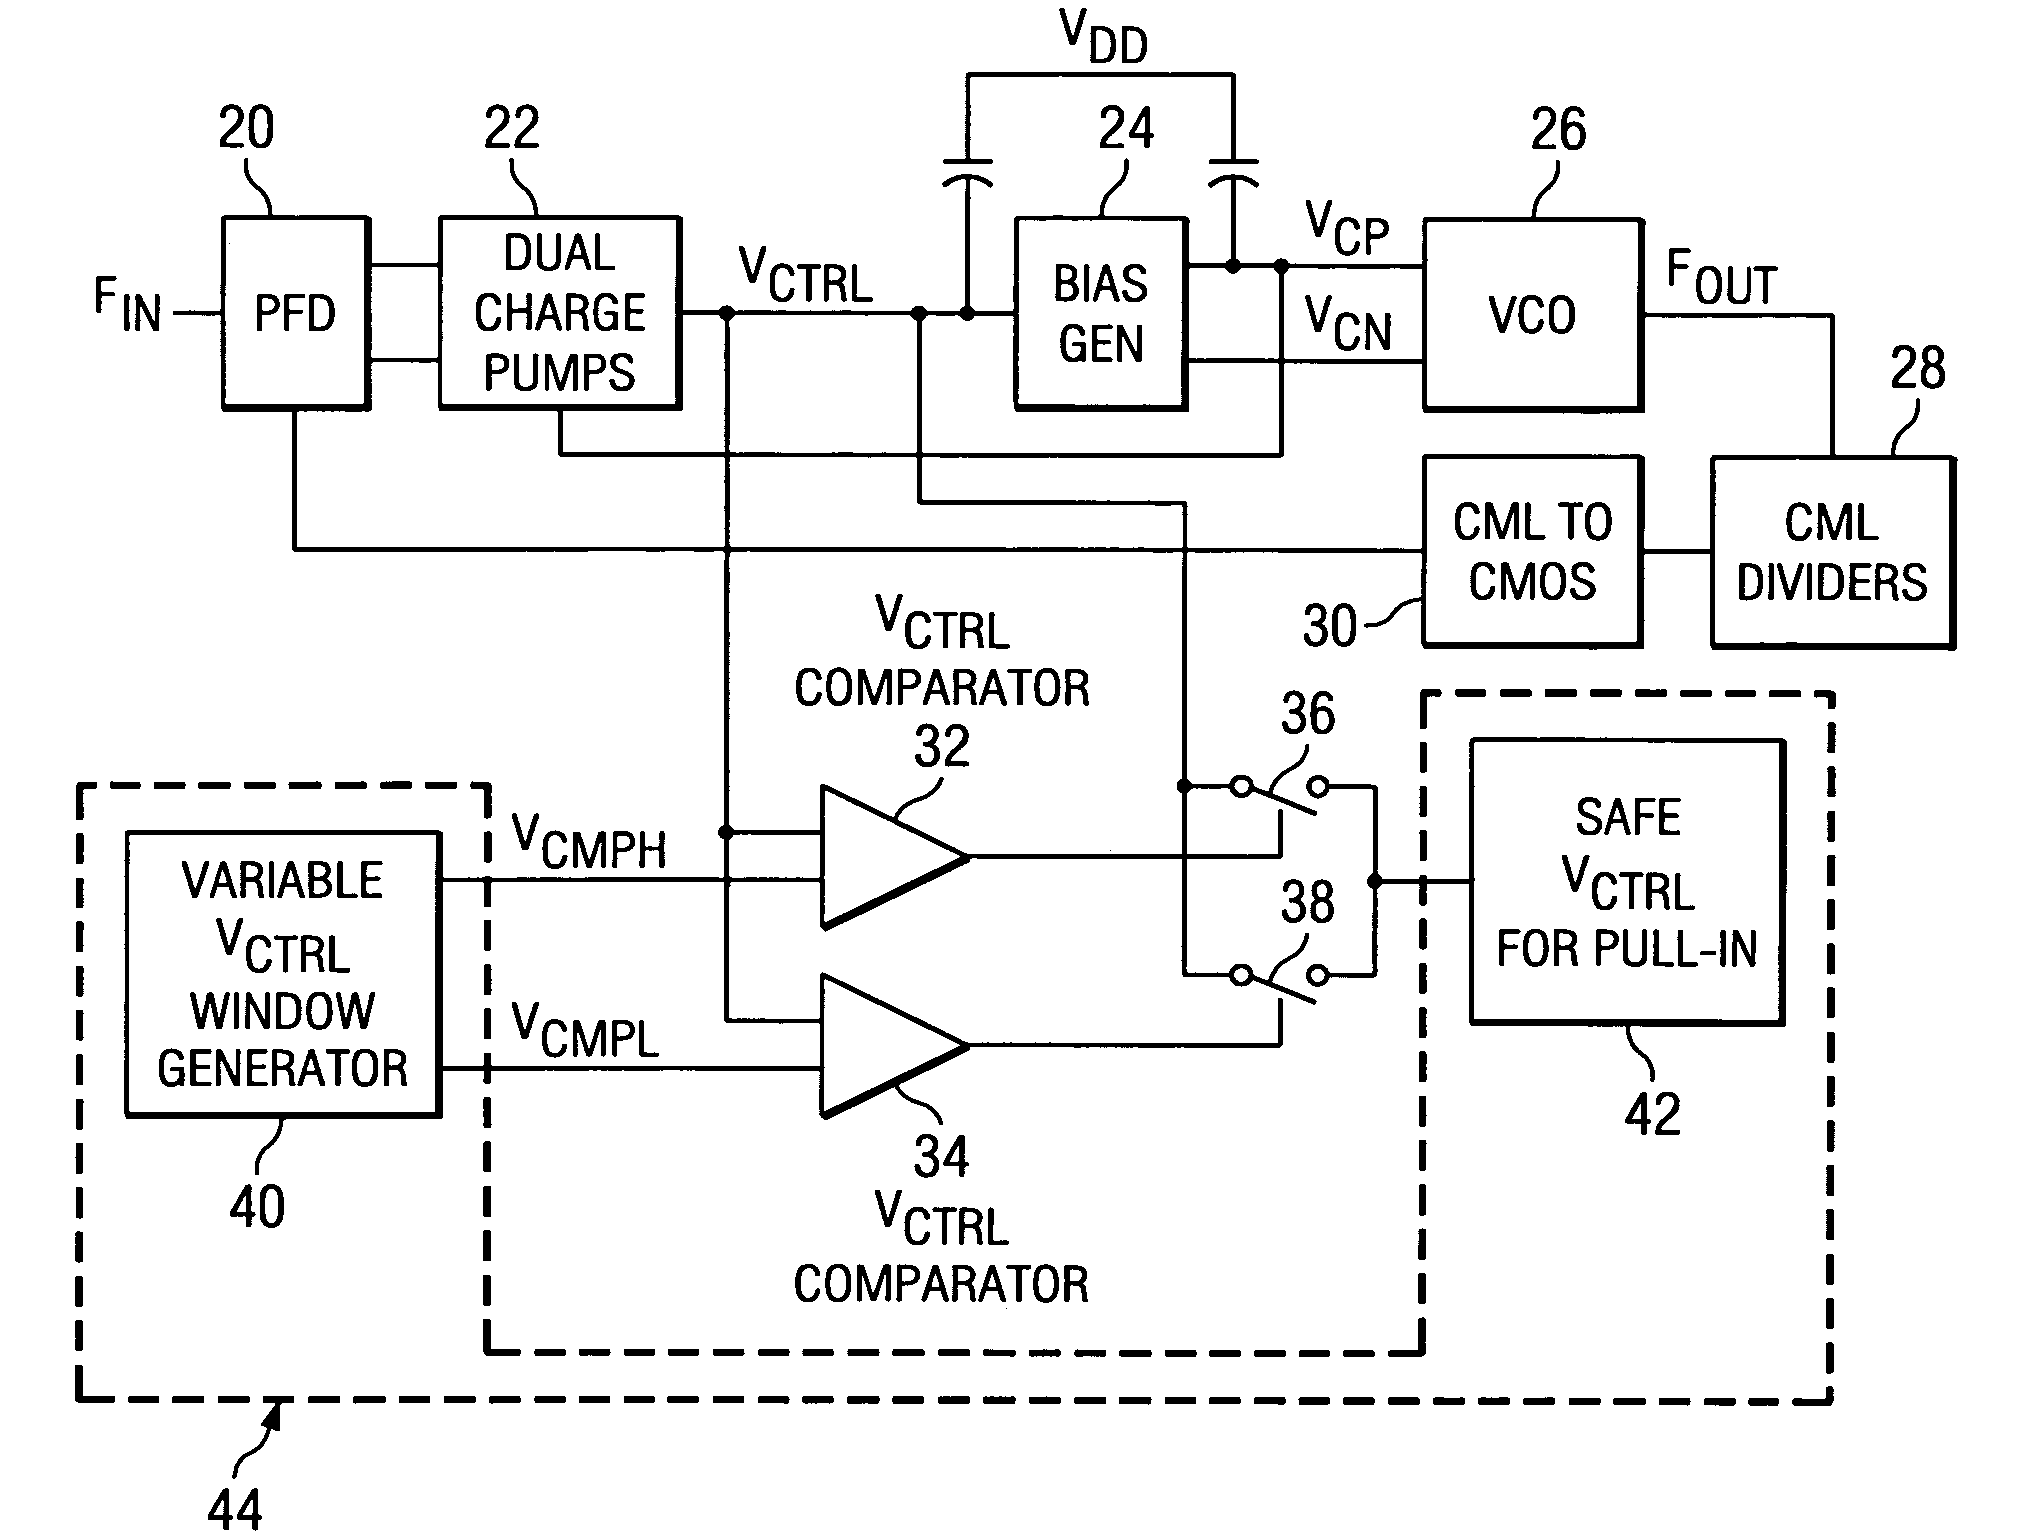 Process tracking limiter for VCO control voltages